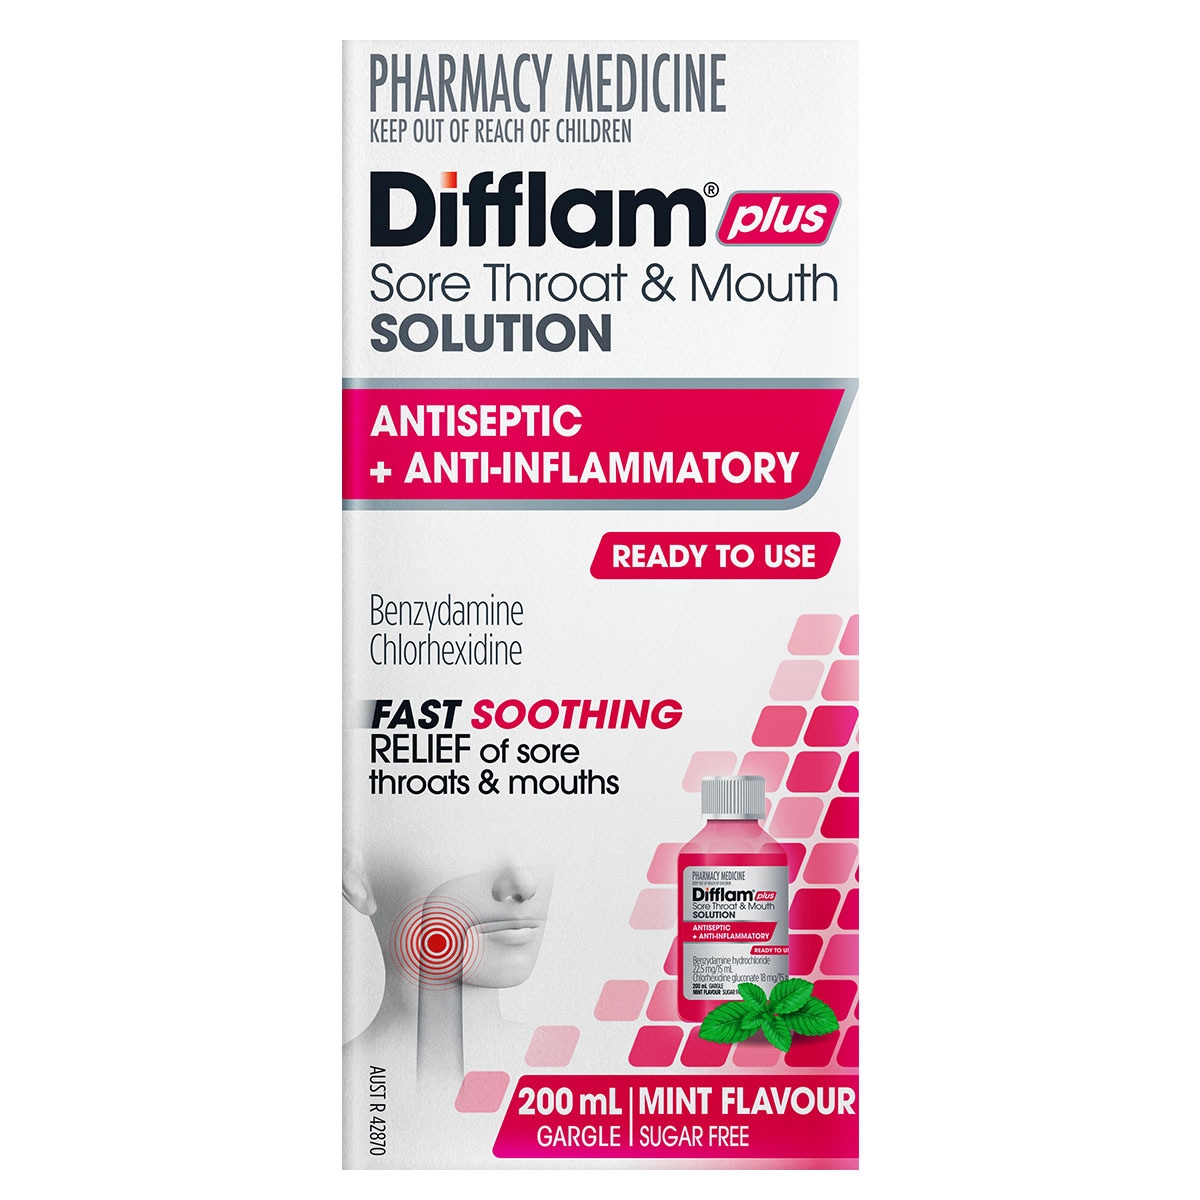 Difflam Plus Sore Throat & Mouth Solution + Antiseptic & Anti-Inflammatory 200ml